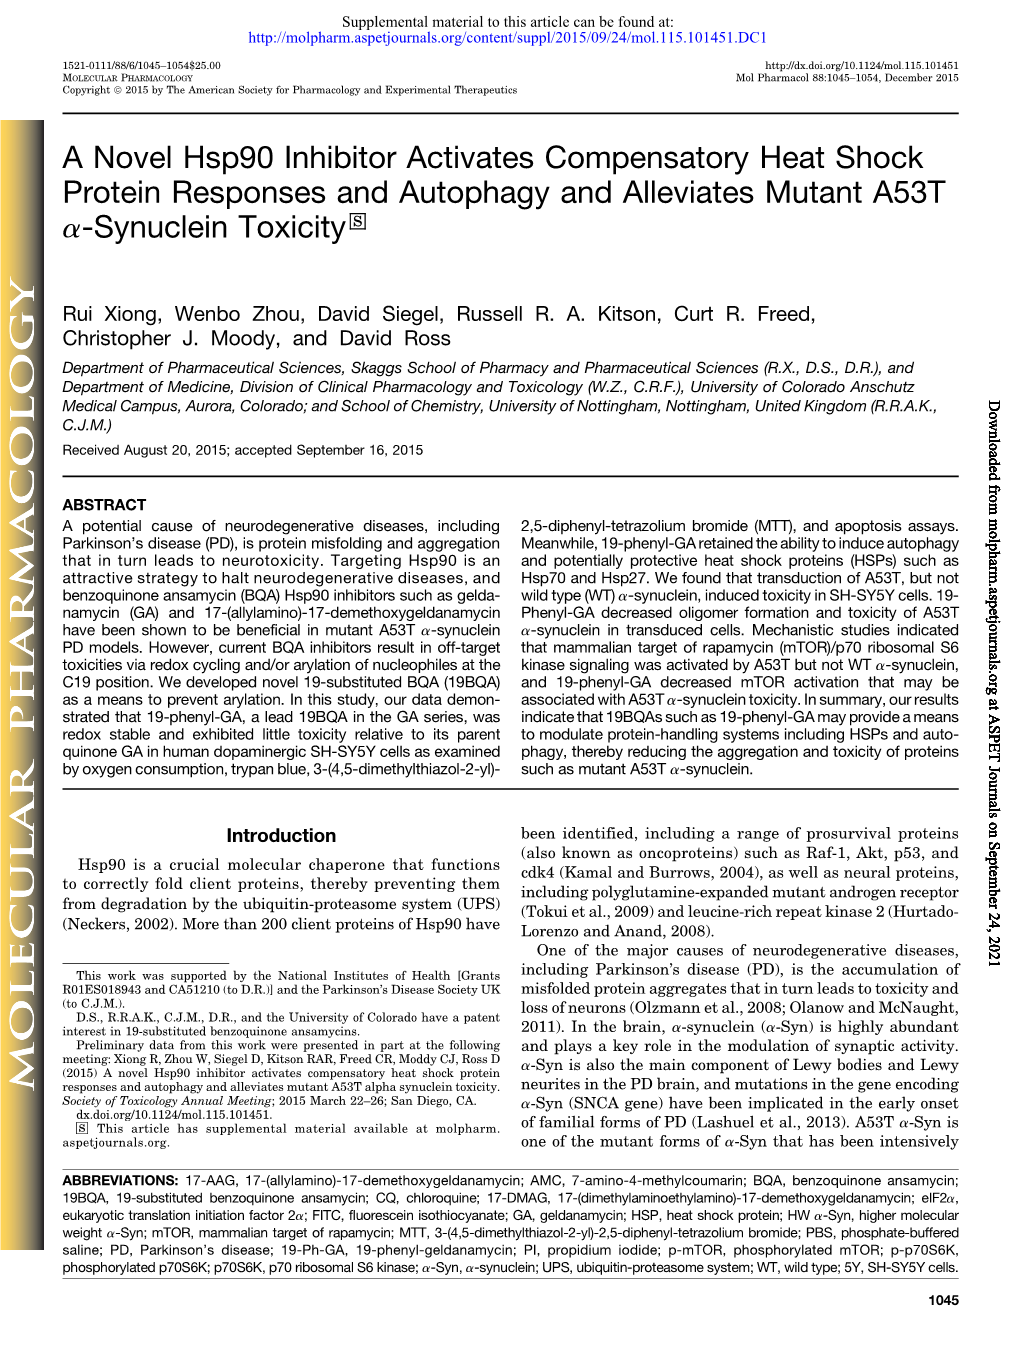 A Novel Hsp90 Inhibitor Activates Compensatory Heat Shock Protein Responses and Autophagy and Alleviates Mutant A53T A-Synuclein Toxicity S